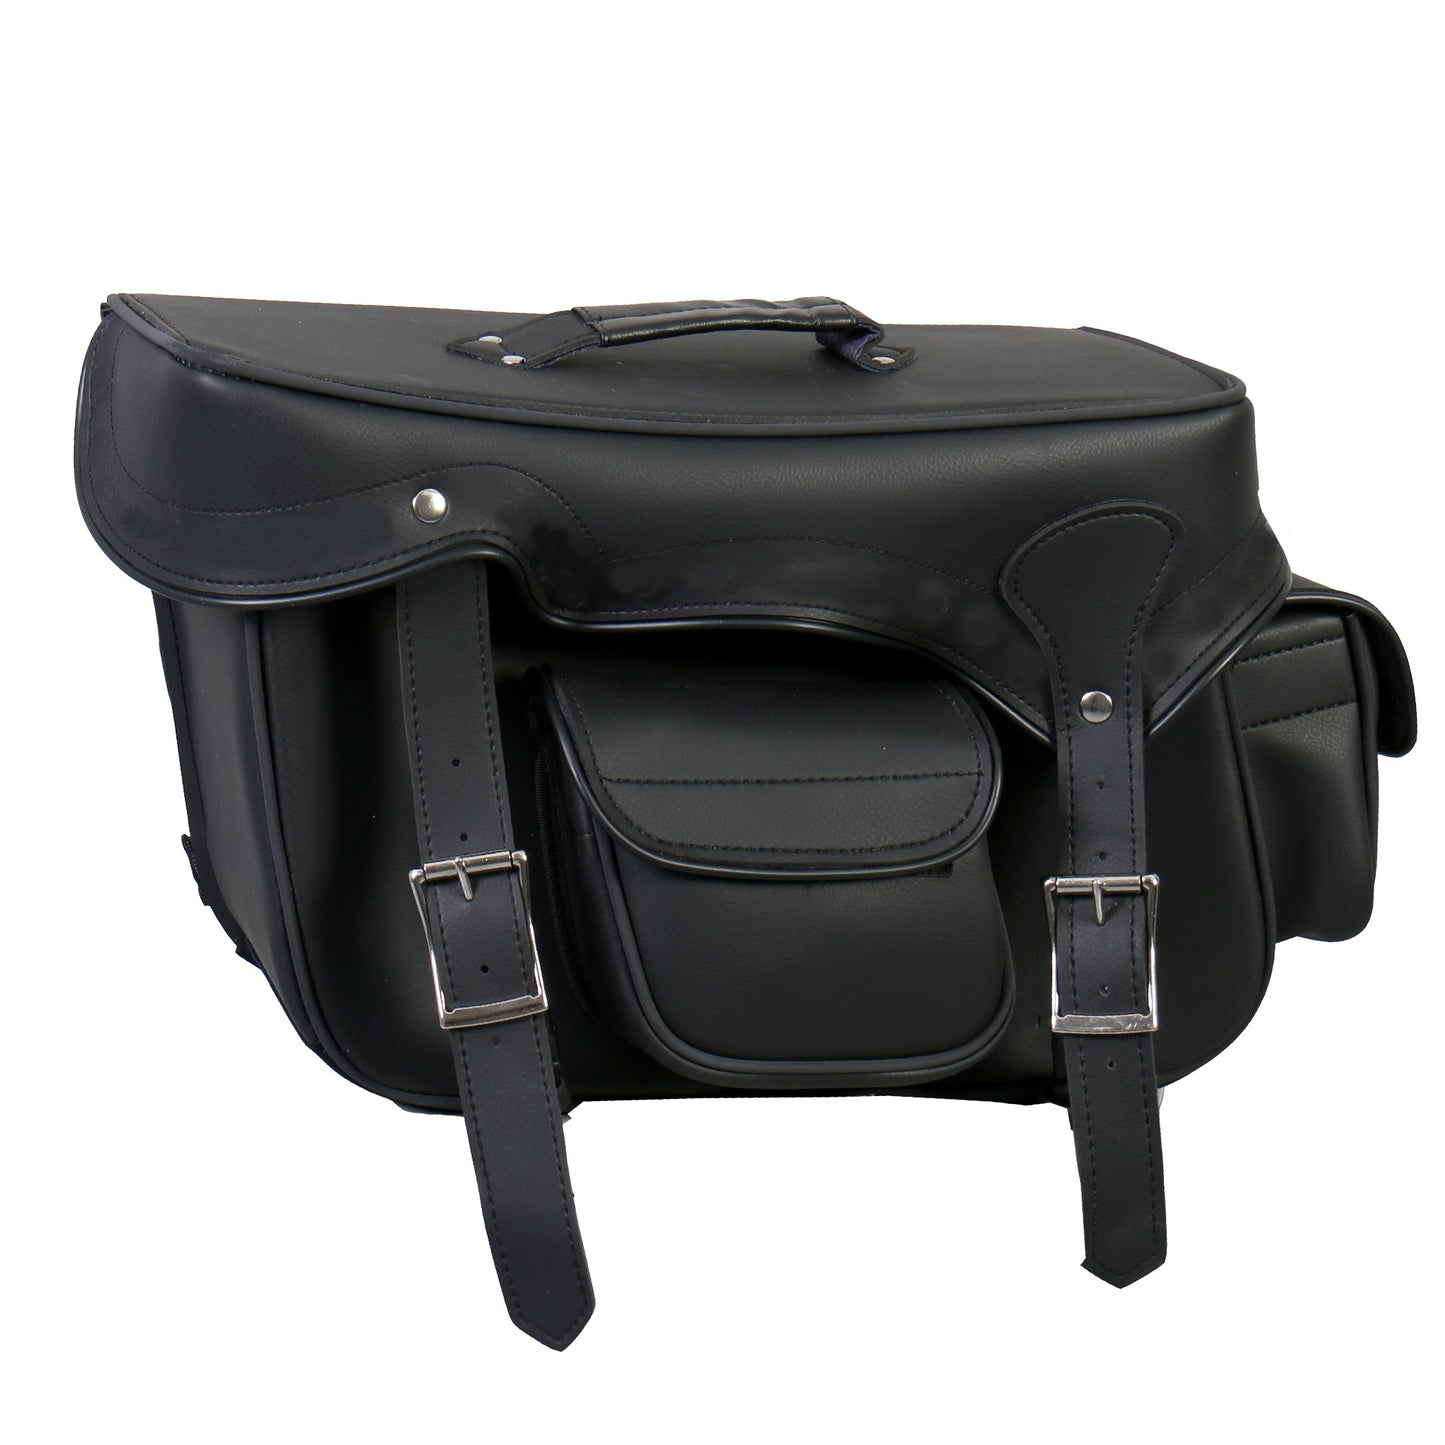 Hot Leathers SDA1005 Extra Large Saddle Bag with Concealed Carry Pocket and Reflective Piping 20X11X7